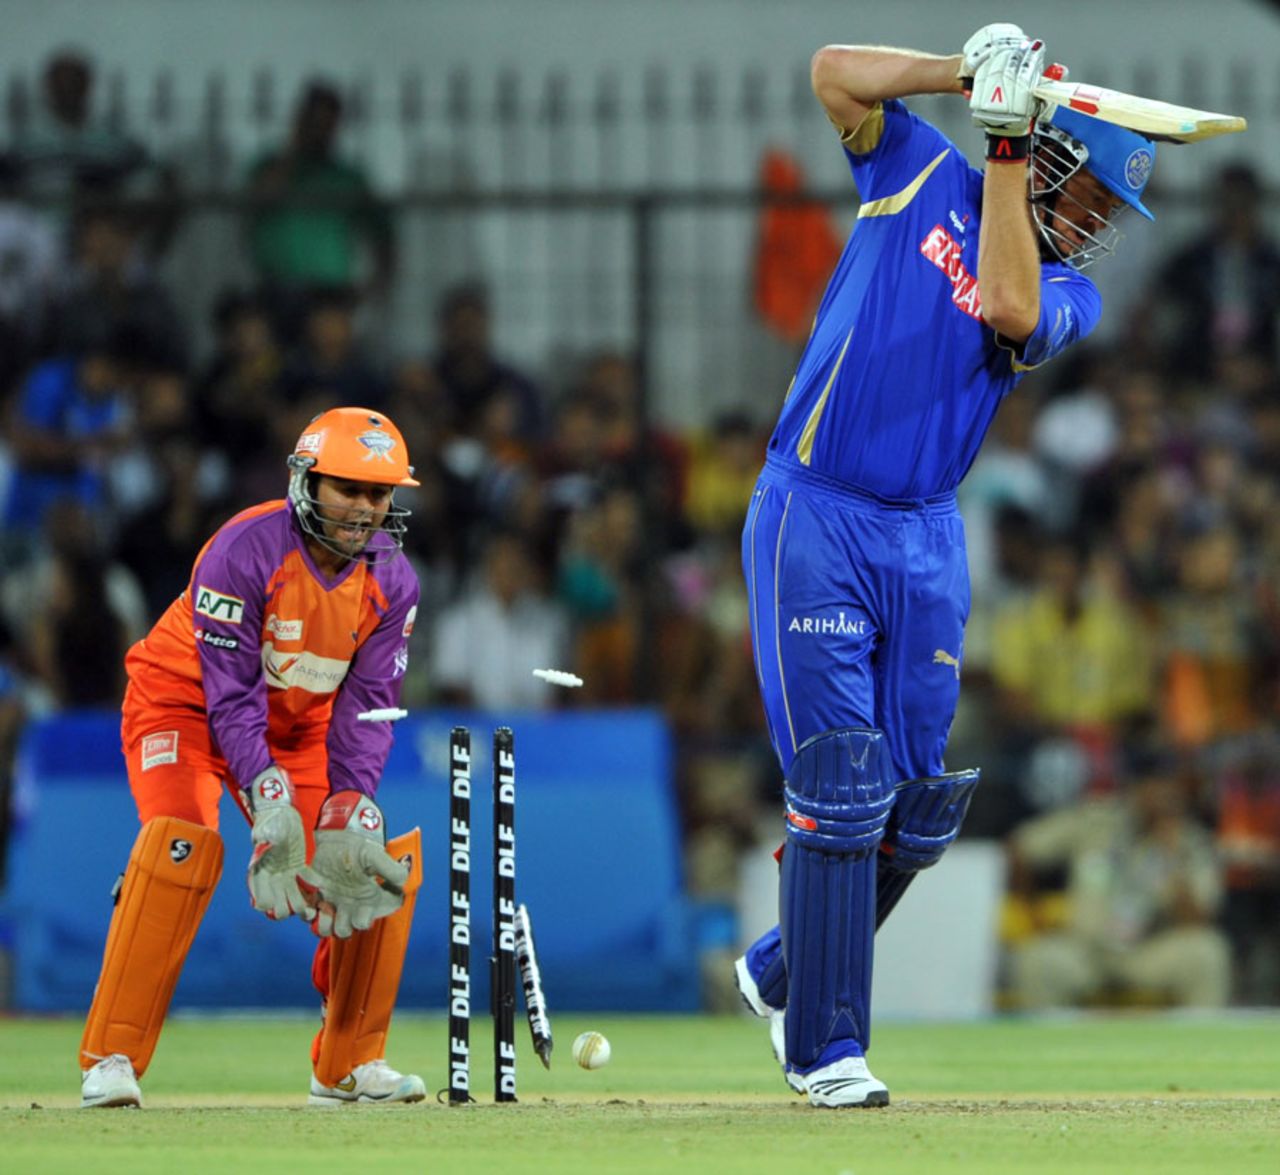 Jacob Oram is bowled for a duck, Kochi Tuskers Kerala v Rajasthan Royals, IPL 2011, Indore, May 15, 2011 